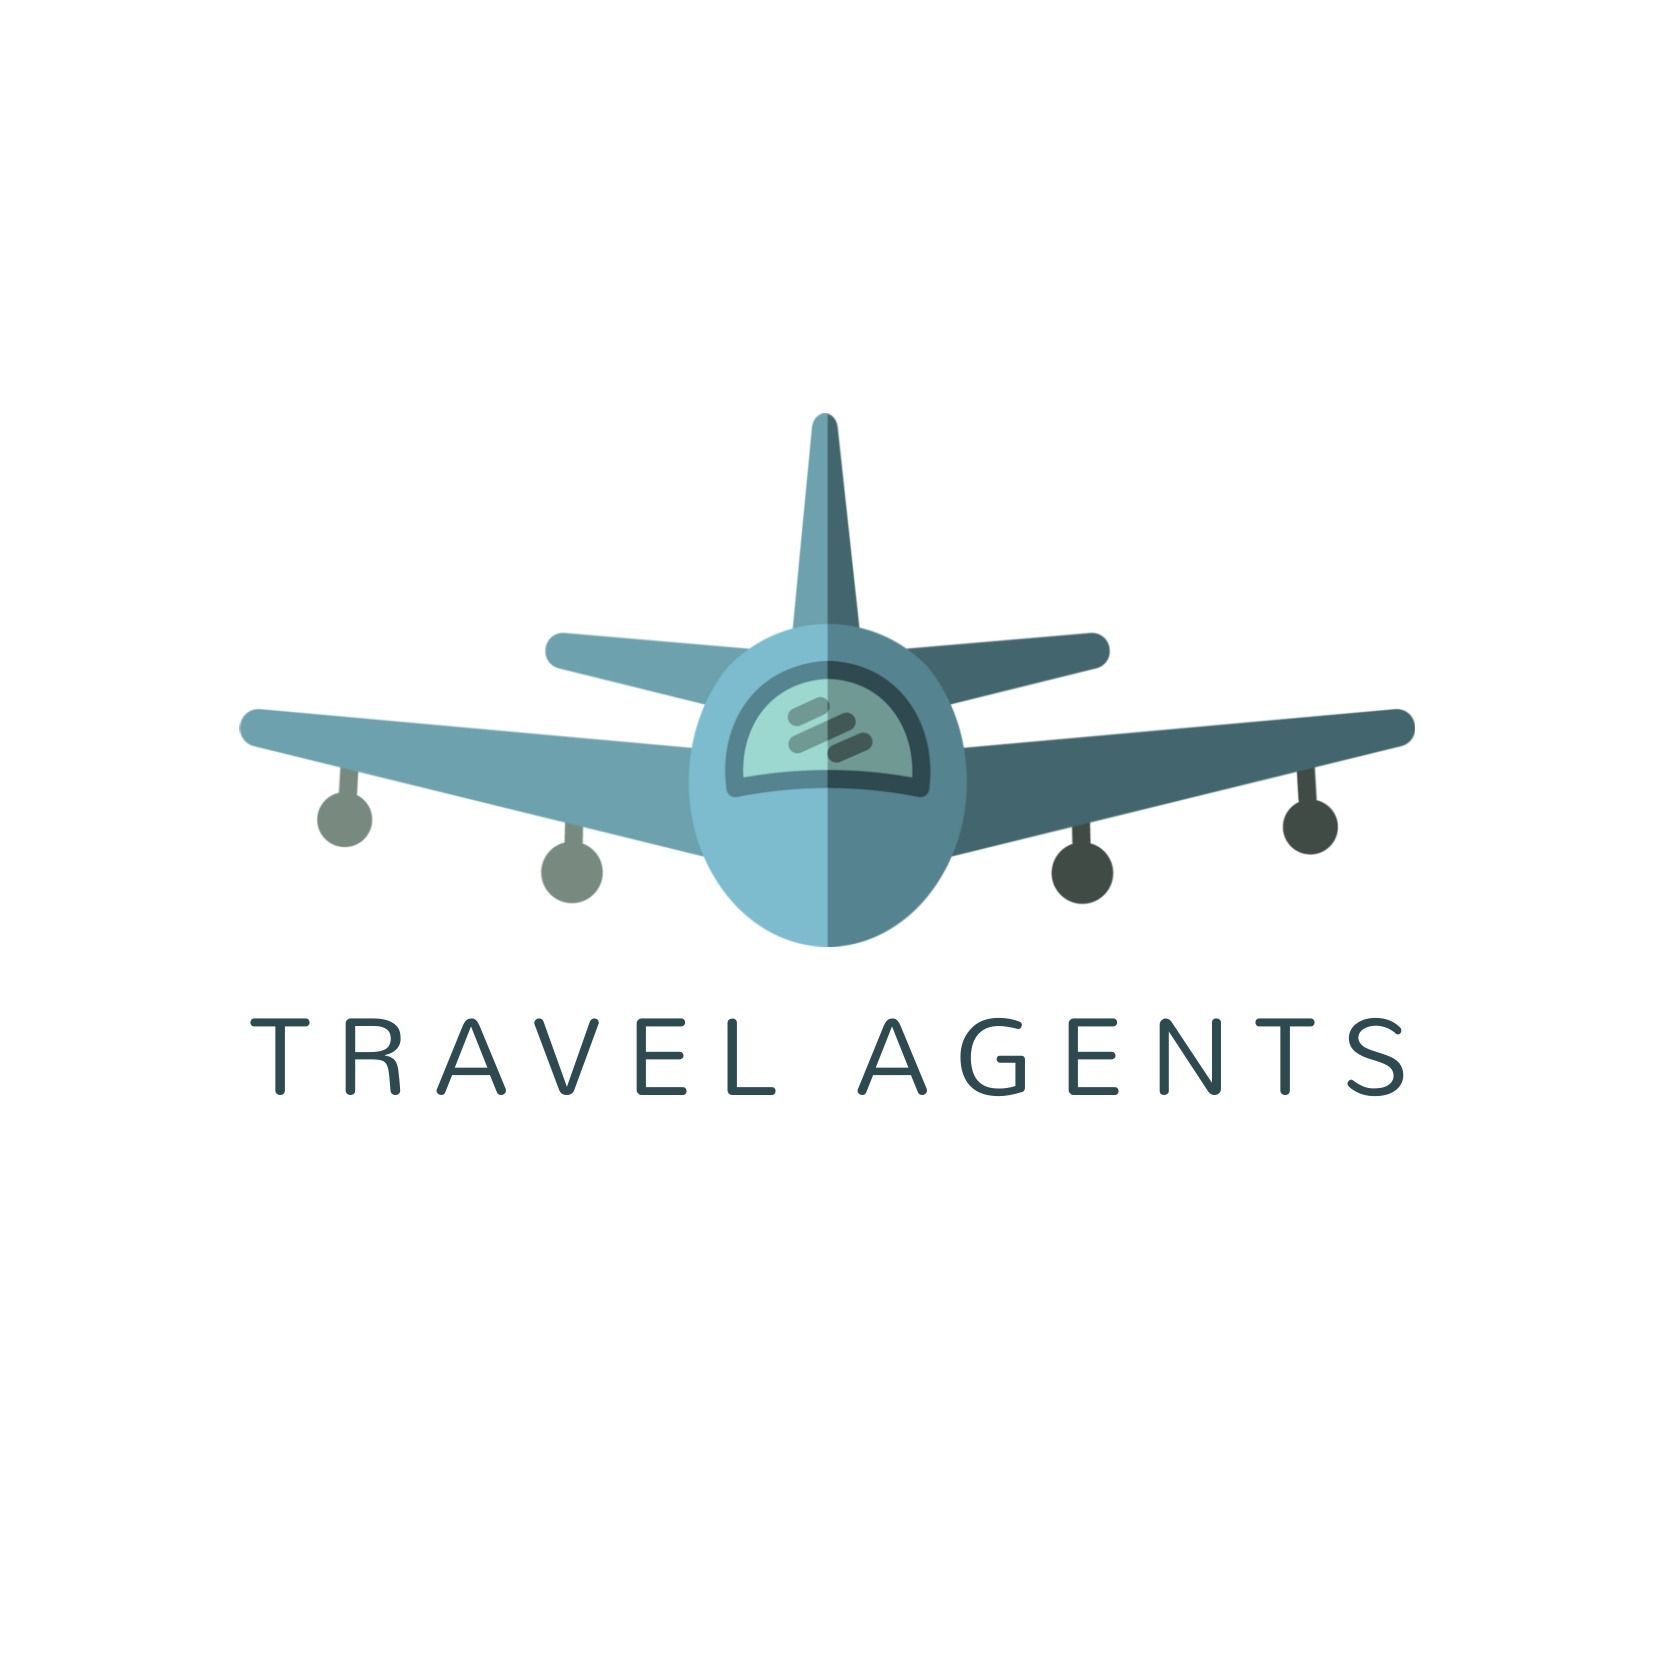 Travel agency logo with an airplane facing the viewer - Mallanna is a small but legible and powerful font - Image